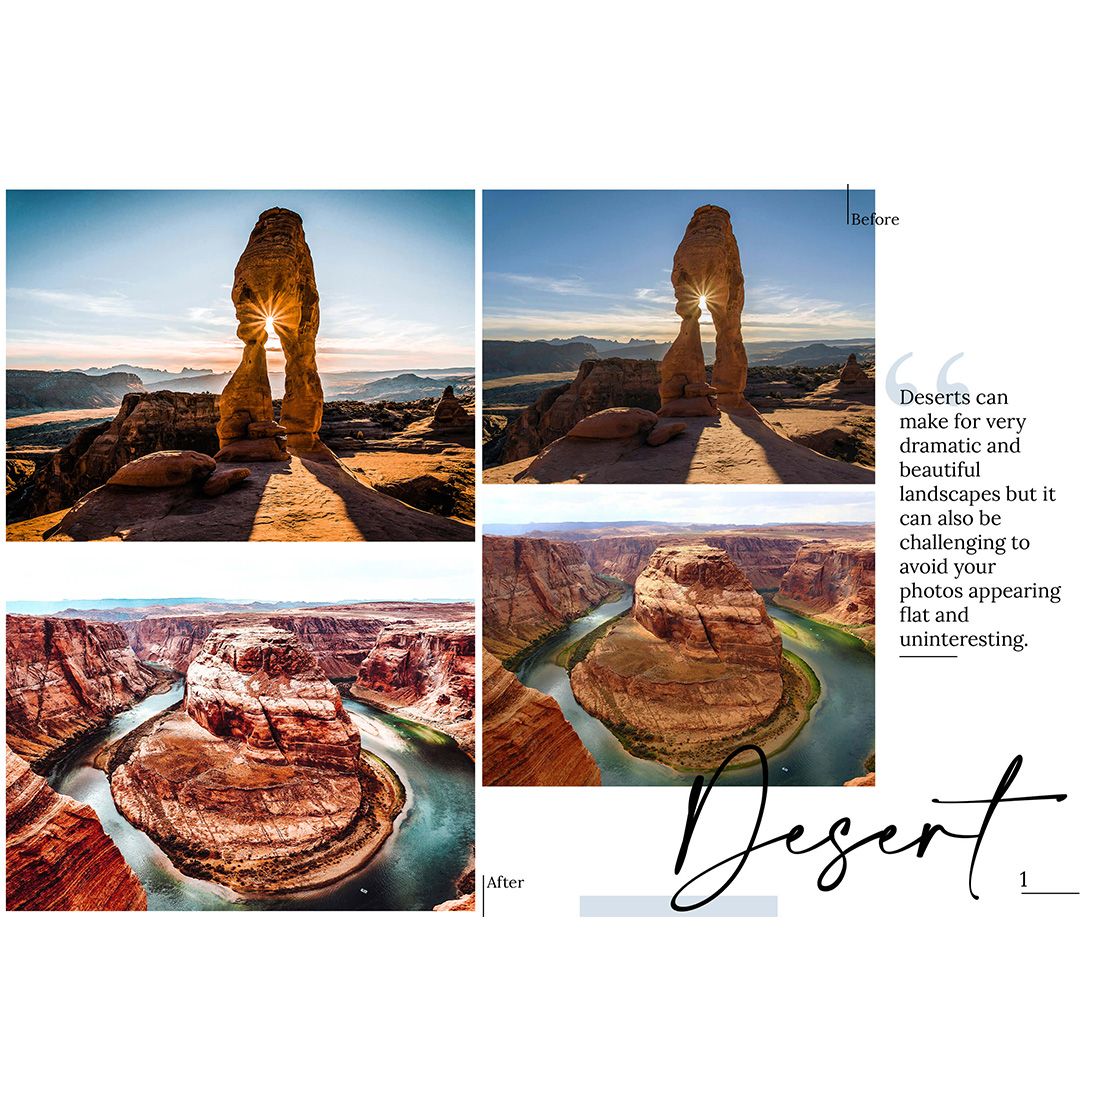 35 Photoshop Actions, Dreamland Ps Action, Landscape ACR Preset, Scenery Ps Filter, Atn Portrait And Lifestyle Theme For Instagram, Blogger preview image.